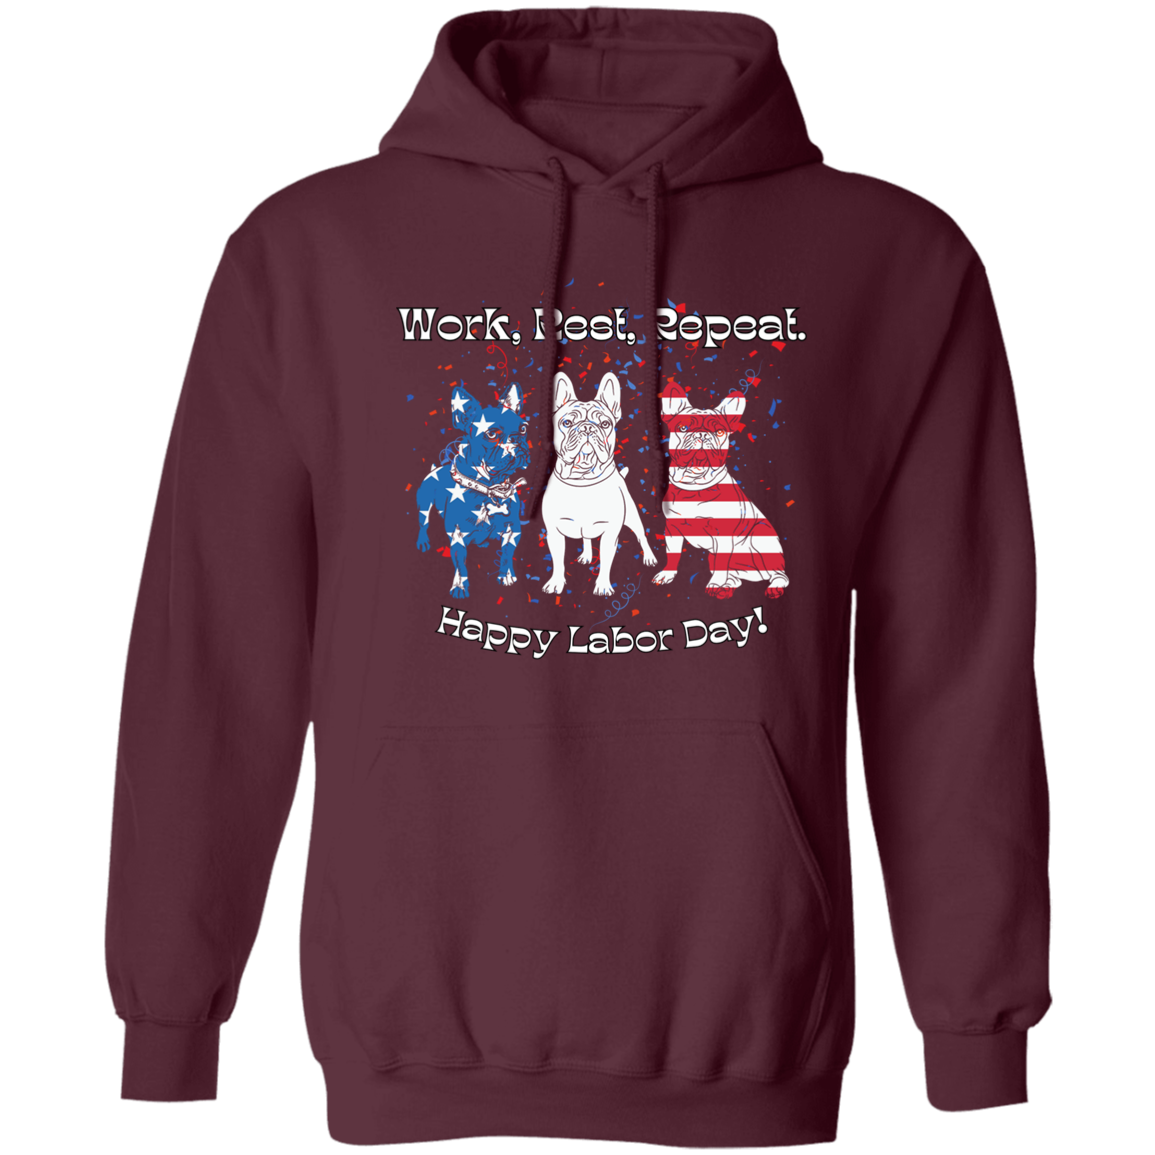 Work, Rest, Repeat - Unisex Pullover Hoodie (Closeout)